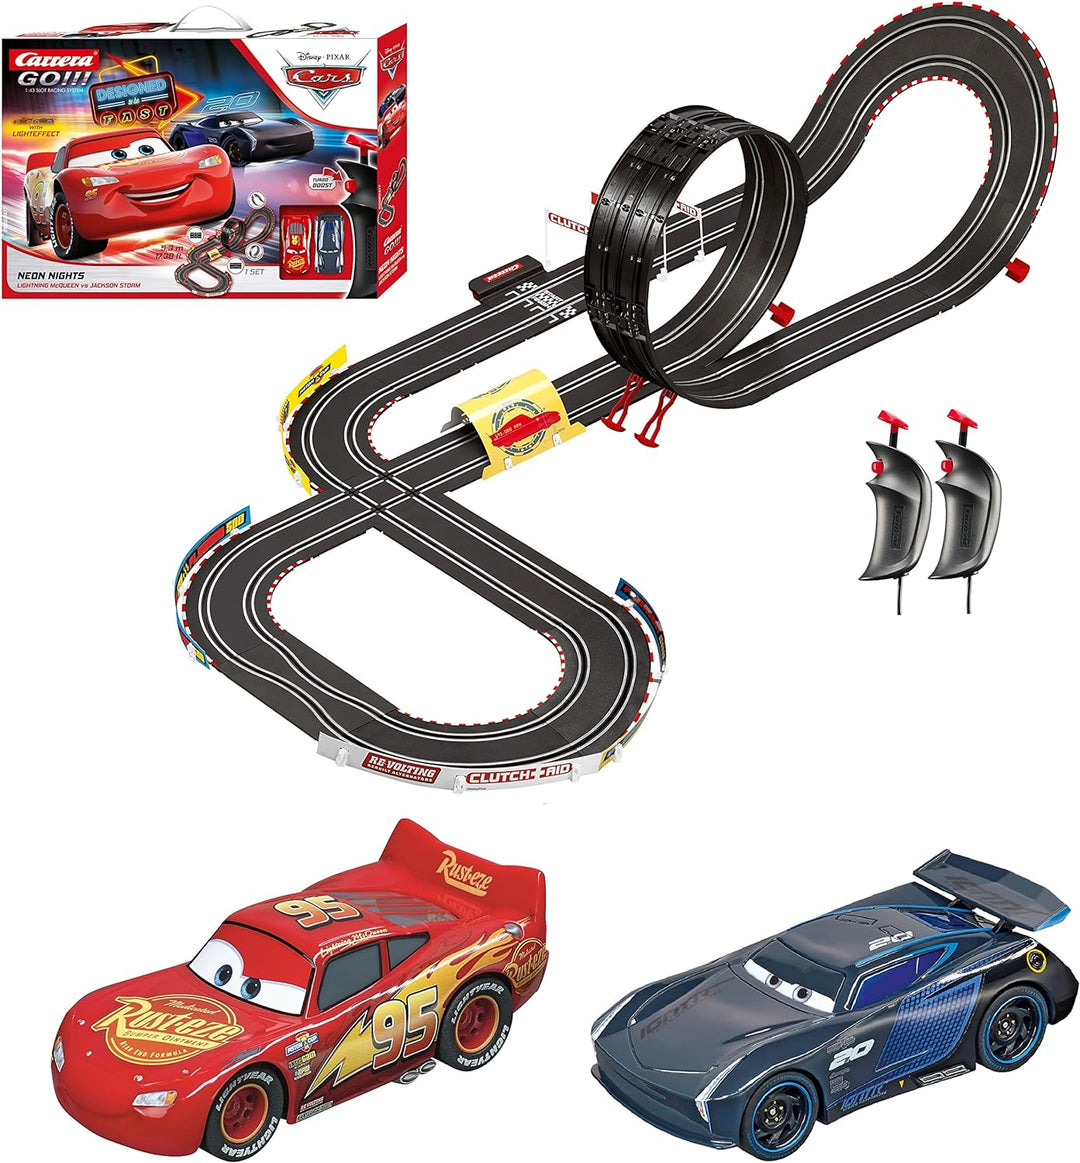 Disney Pixar Cars Neon Nights - Slot Car Track Set for Children, Includes 2 Controllers and 2 Cars in 1:43 Scale Track Layout View 20062477